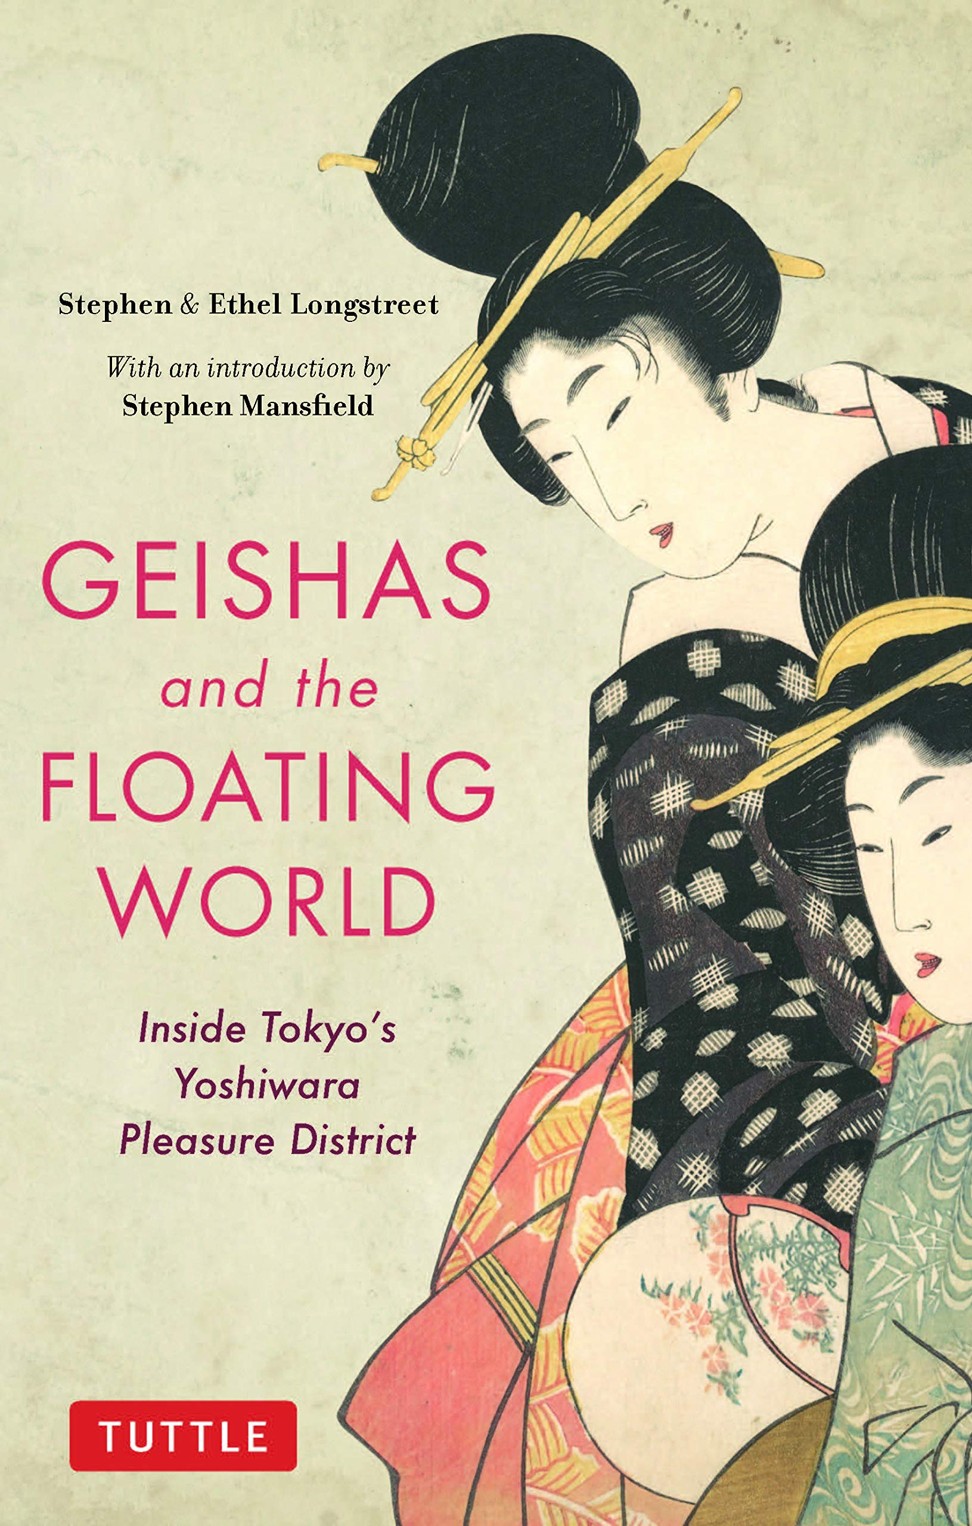 Geishas and the Floating World by Stephen and Ethel Longstreet.